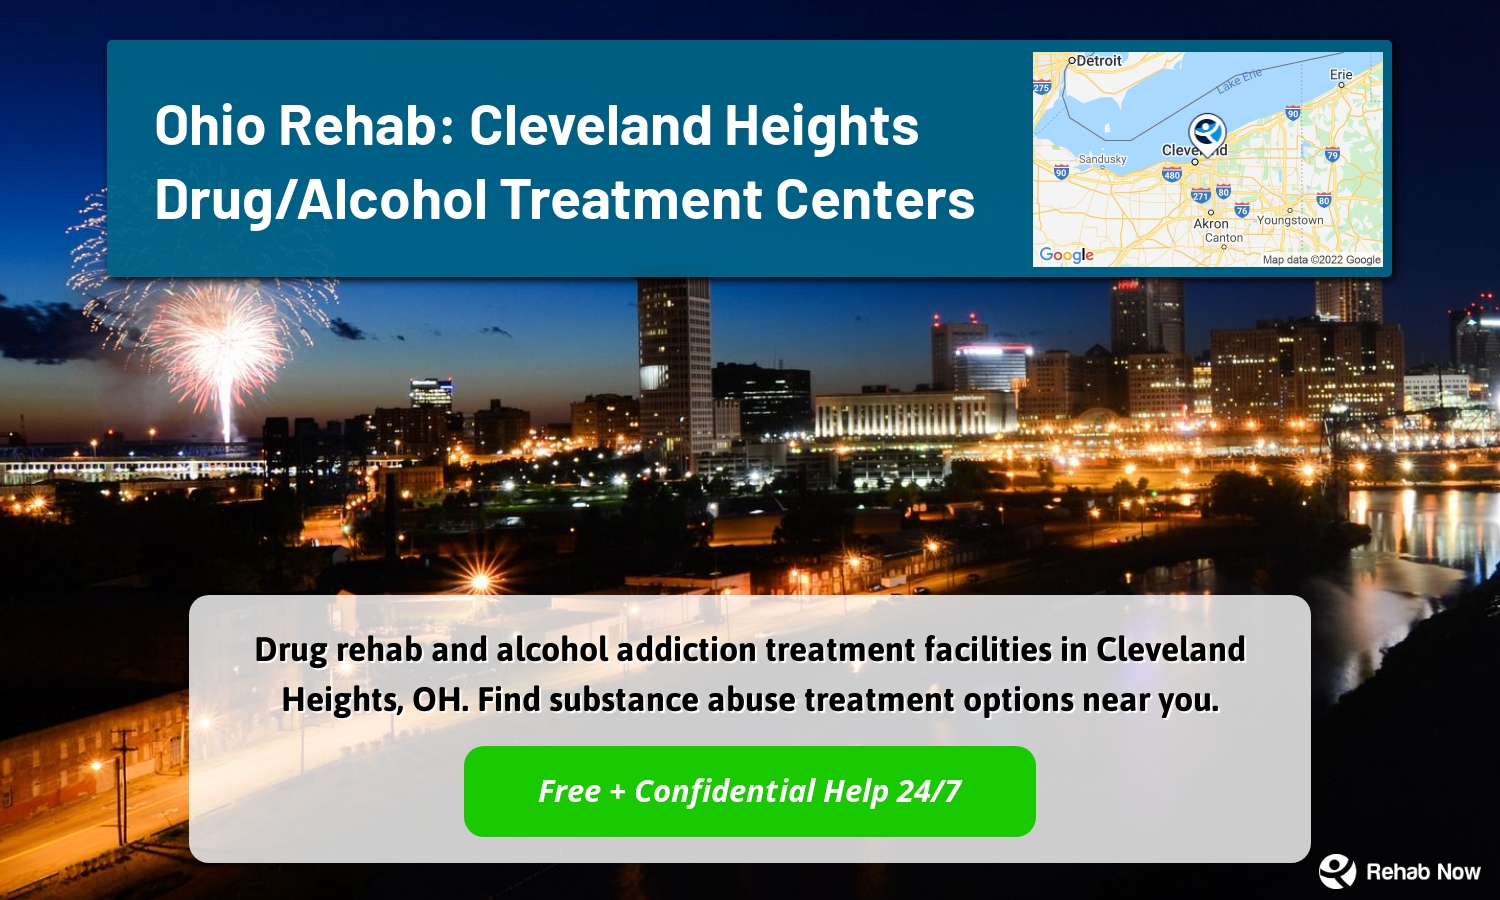 Drug rehab and alcohol addiction treatment facilities in Cleveland Heights, OH. Find substance abuse treatment options near you.